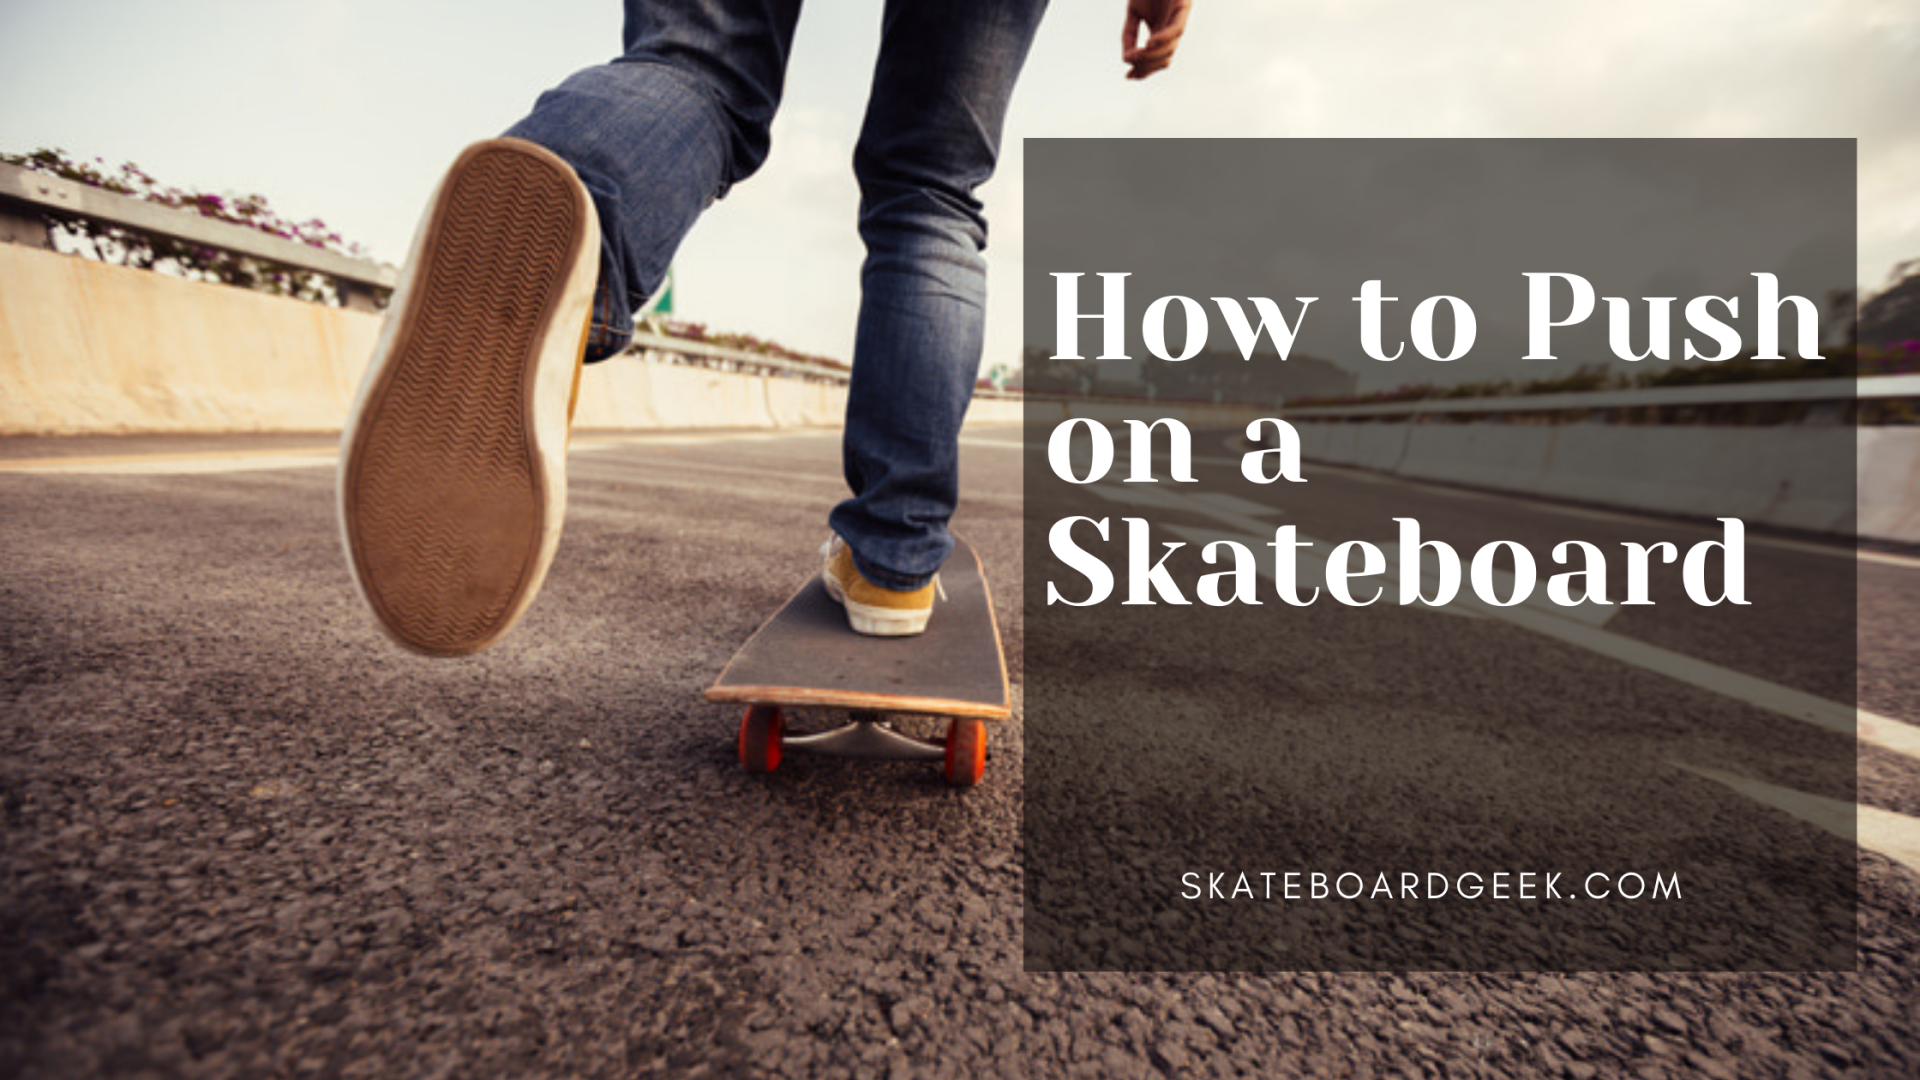 How to Push on a Skateboard